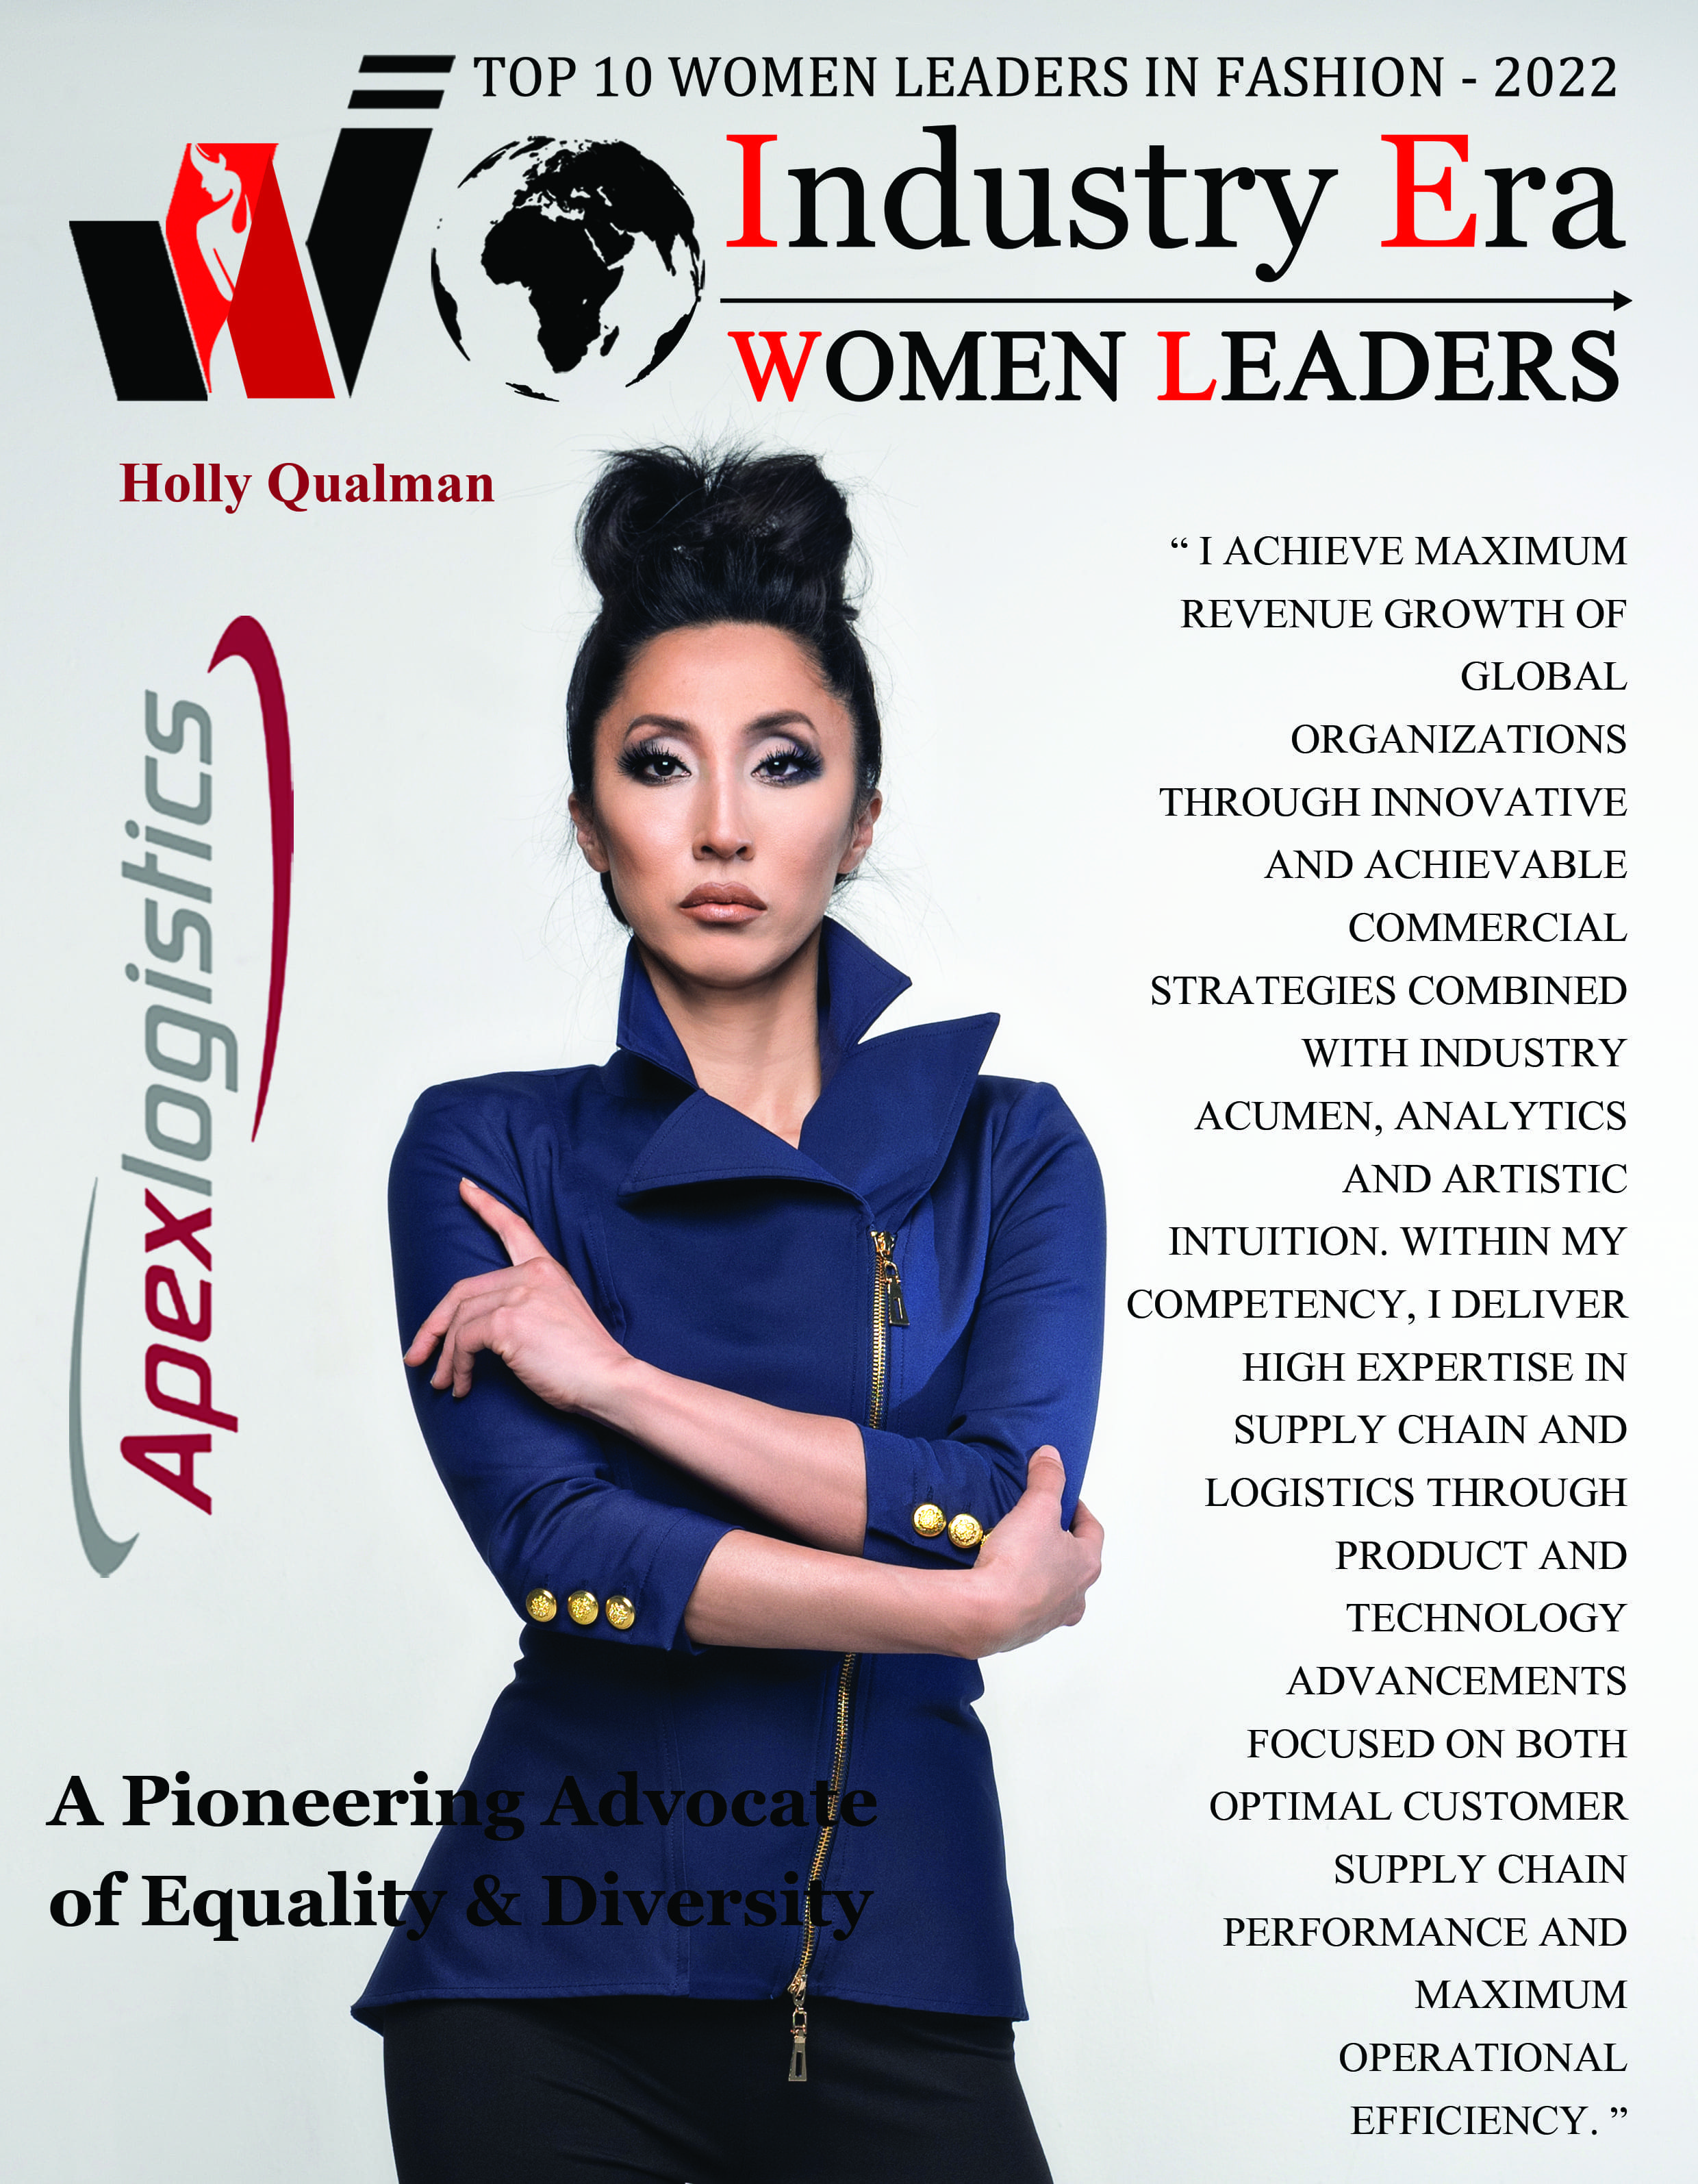 Top 10 Women Leaders in Fashion of 2022 Magazine